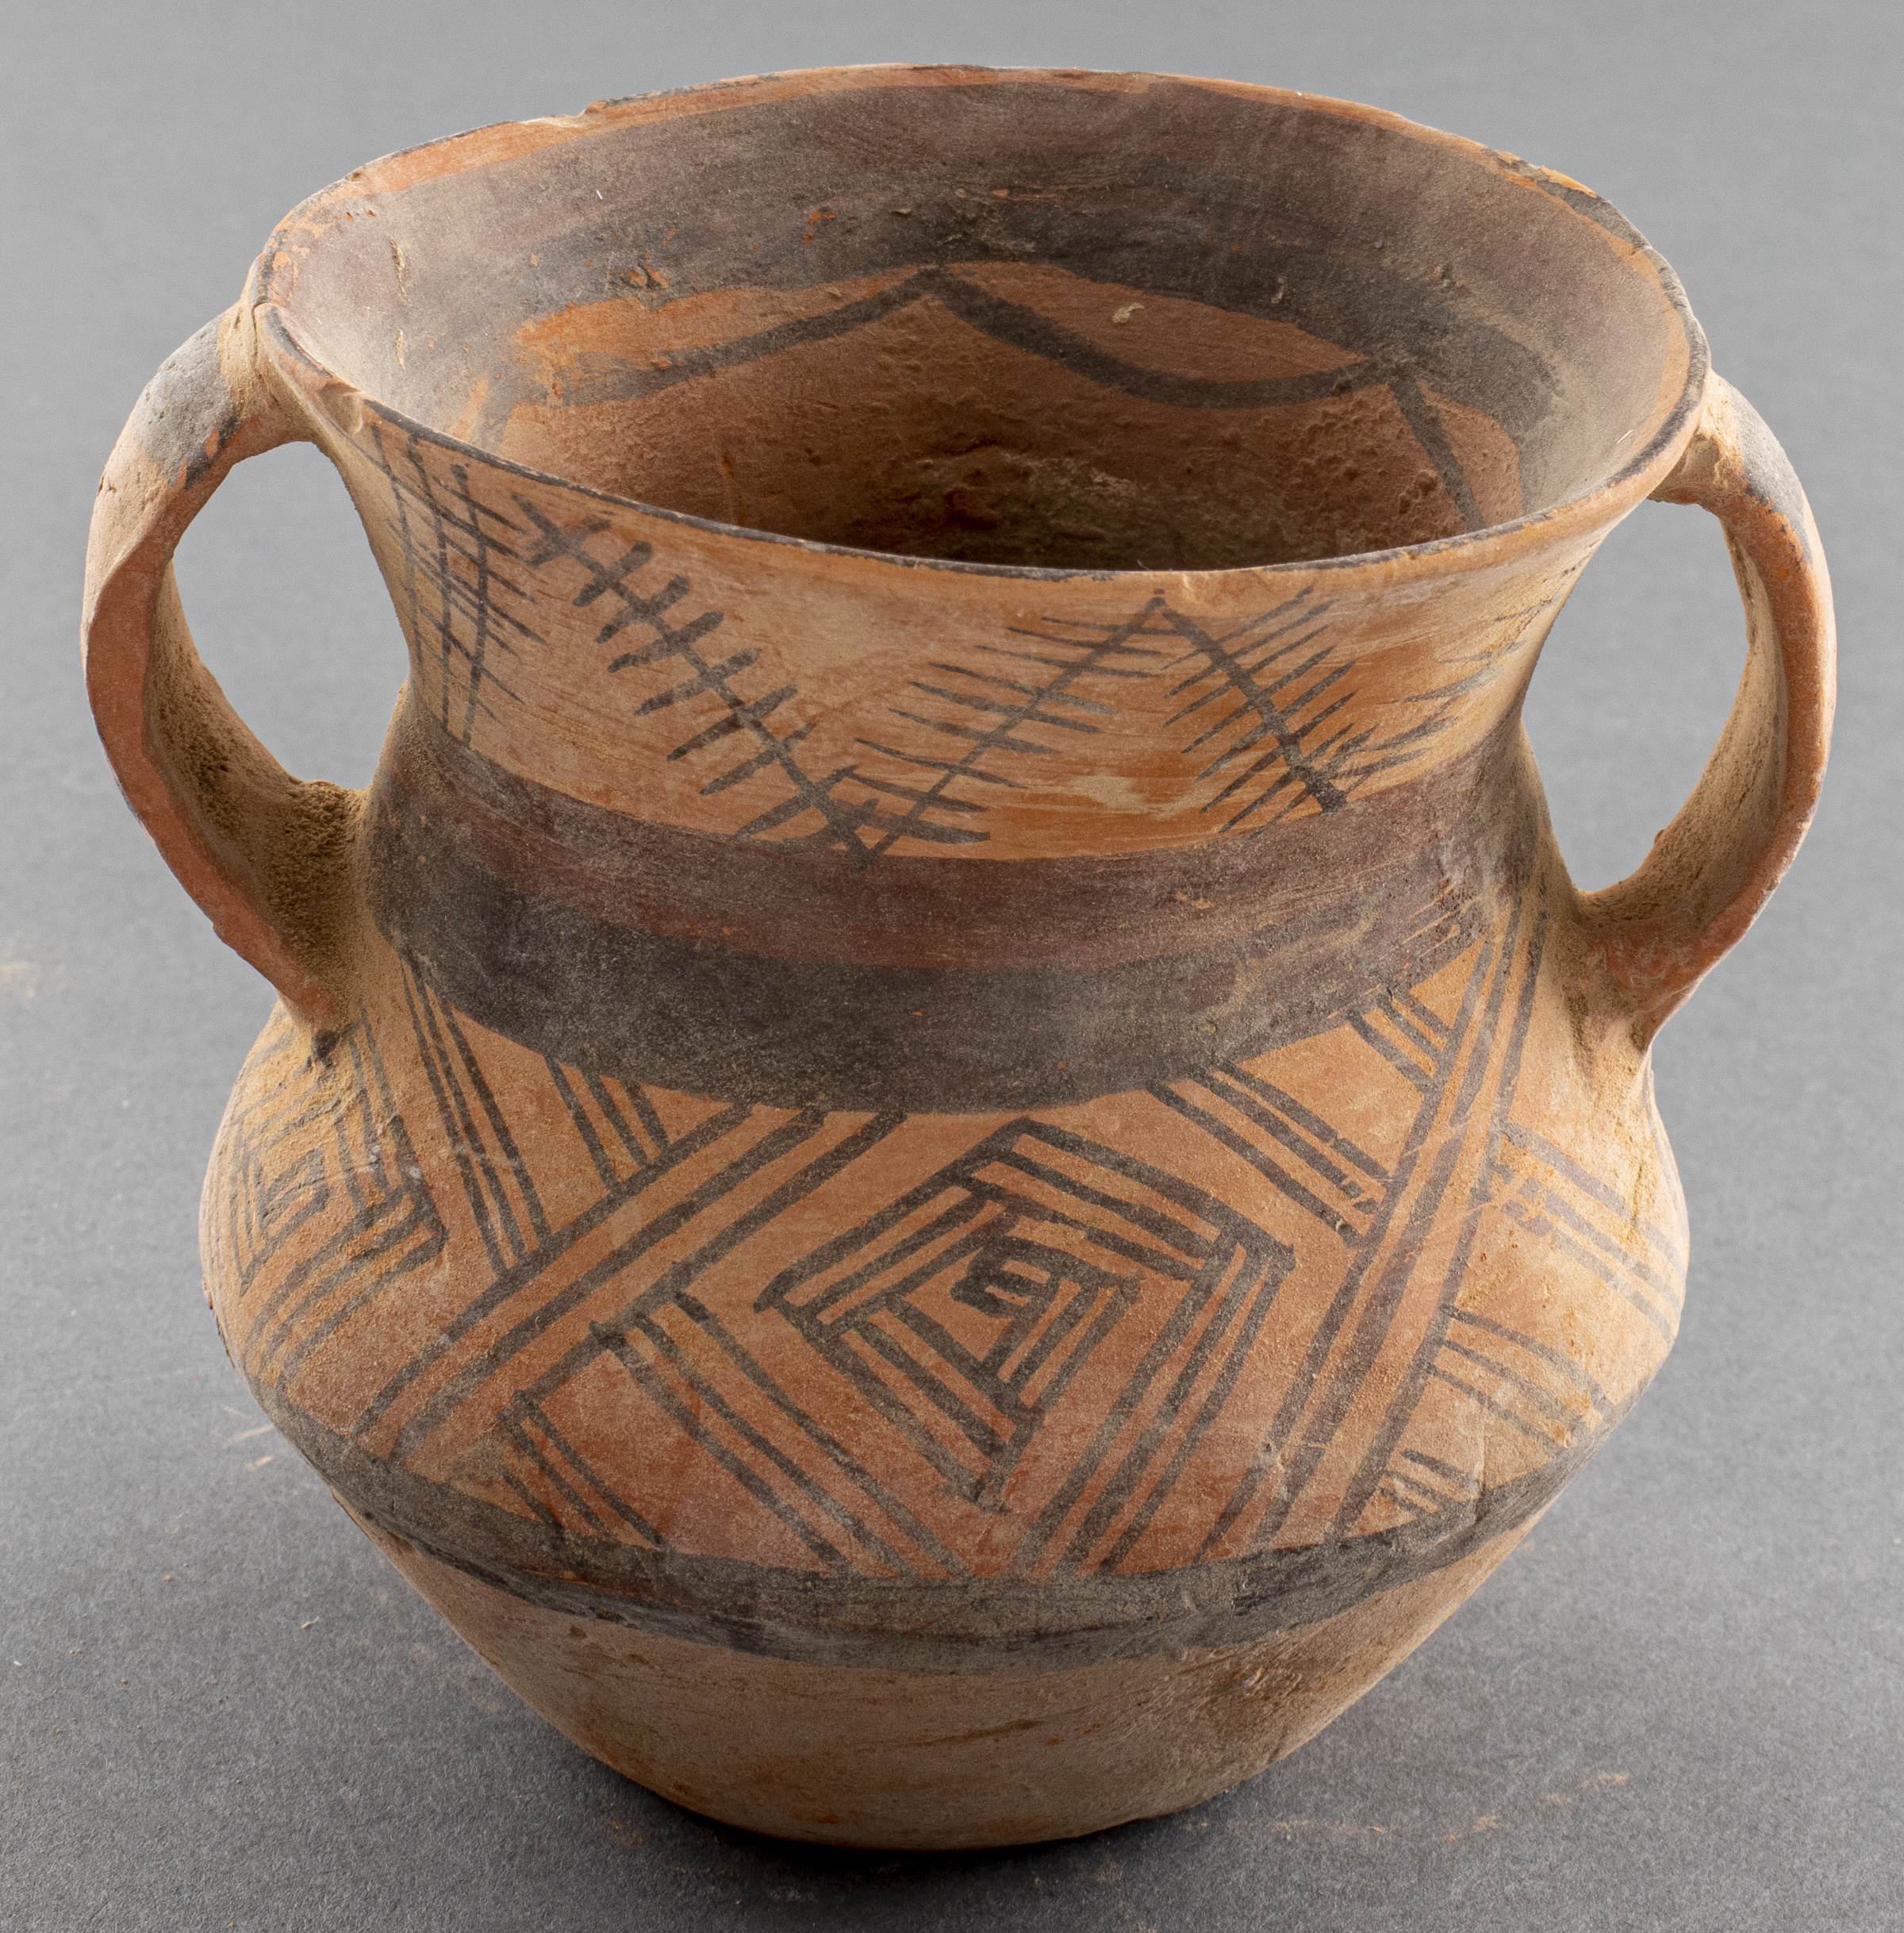 CHINESE NEOLITHIC PERIOD POTTERY 3c4ae0